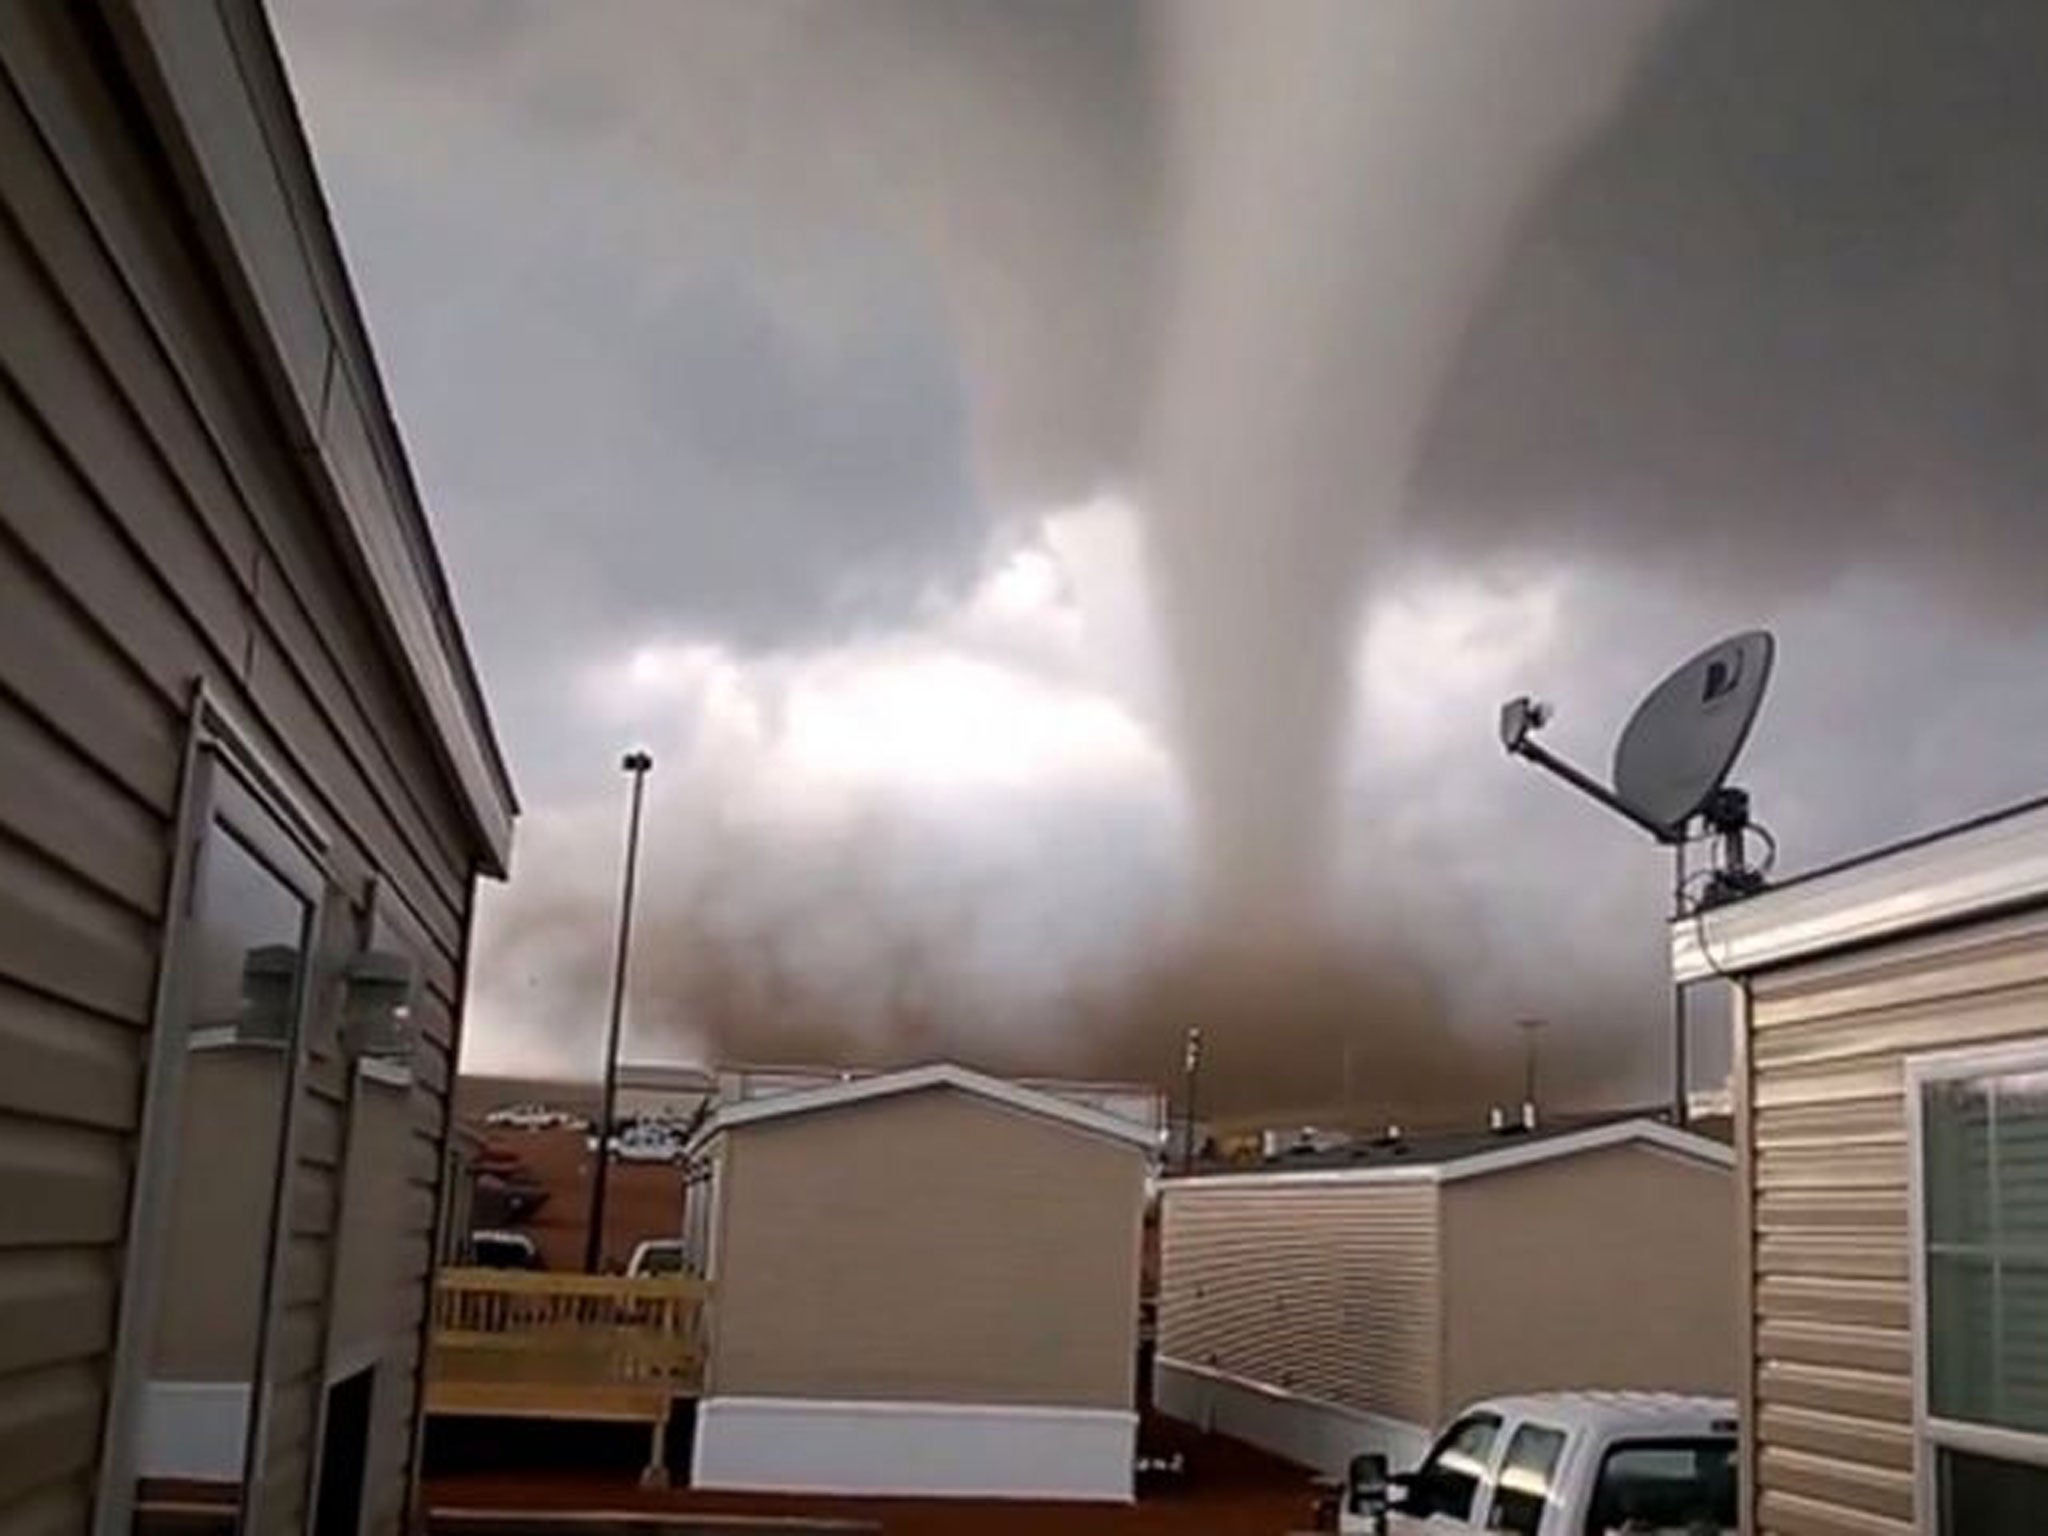 A still from a video provided by Dan Yorgason shows a tornado in a worker's camp near Watford City, N.D., in the heart of the state's booming oil patch. The tornado injured nine people, including a 15-year-old girl who suffered critical injuries, and dama